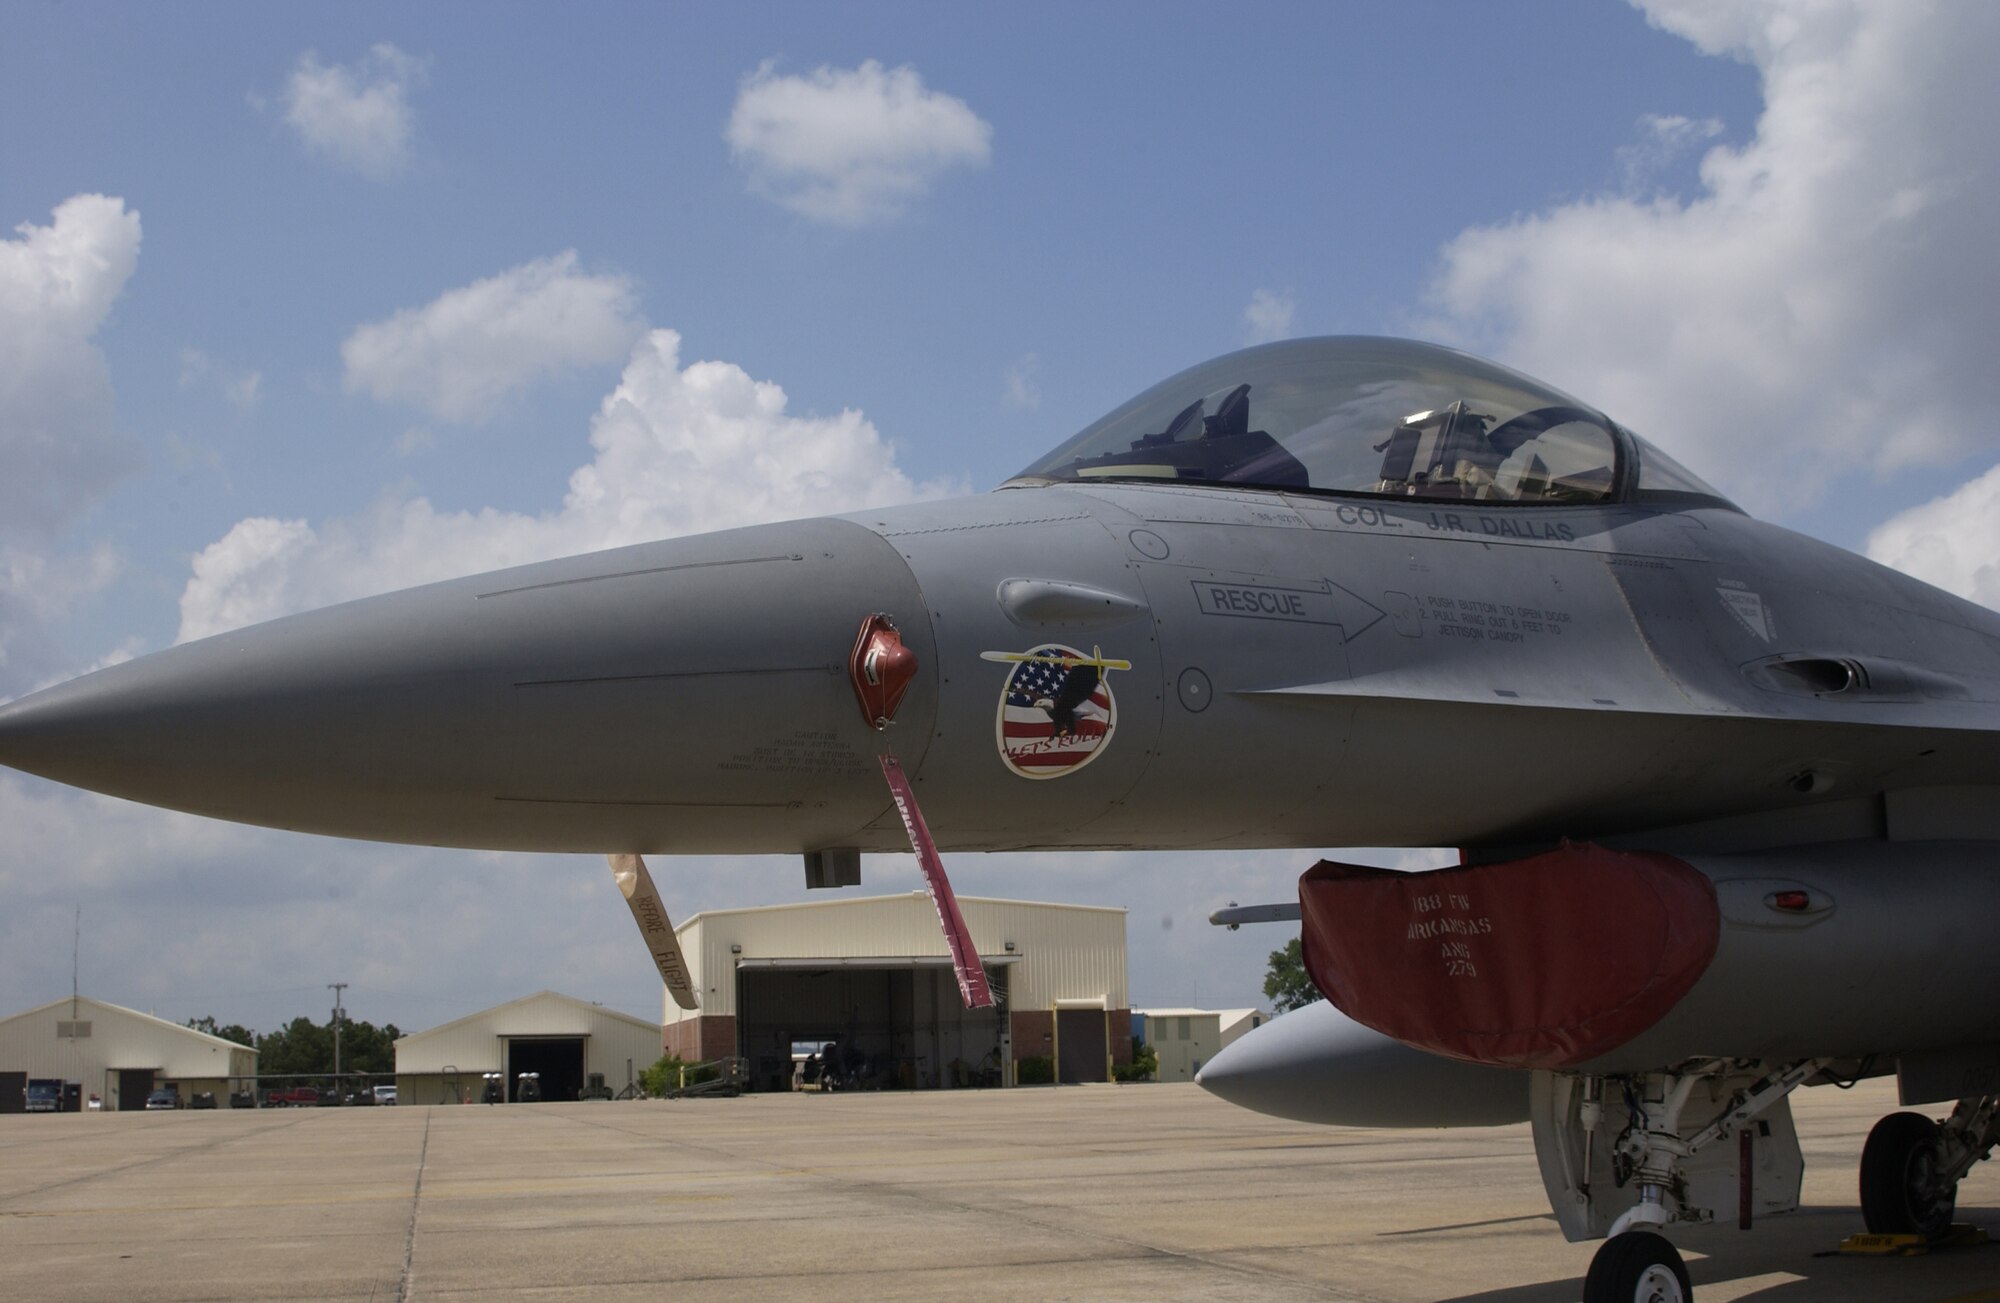 An F-16C Fighting Falcon (Tail No. 279) sits at the ready in the aftermath of Sept. 11, 2001, at Ebbing Air National Guard Base, Fort Smith, Arkansas. The 188th was called up to provide air sovereignty alert missions to keep the skies safe. This was tabbed as the unit's marque aircraft tagged Spirit of 9-11 "Let's Roll". (U.S. Air National Guard photo by retired Senior Master Sgt. Dennis L Brambl/Released)